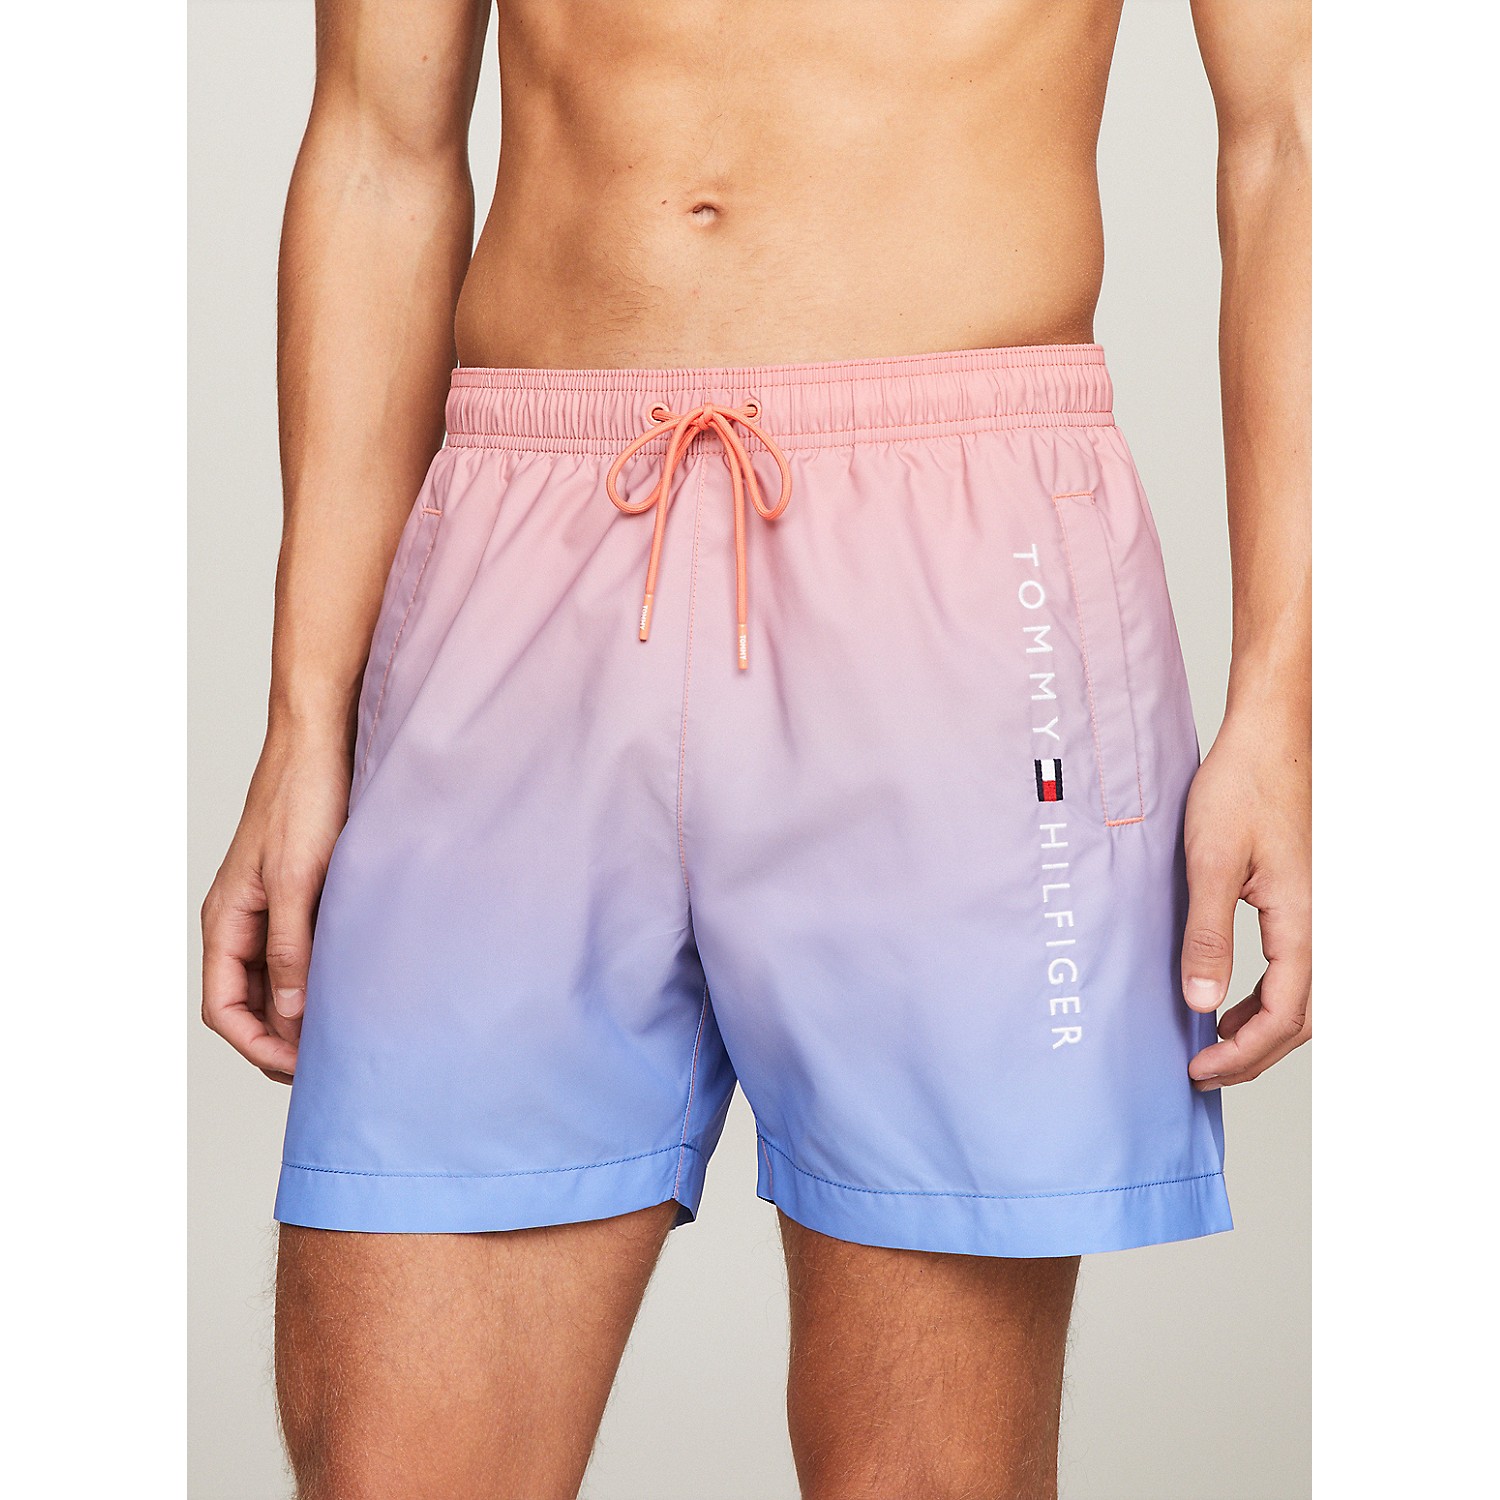 TOMMY HILFIGER Ombre 5 Swim Trunk